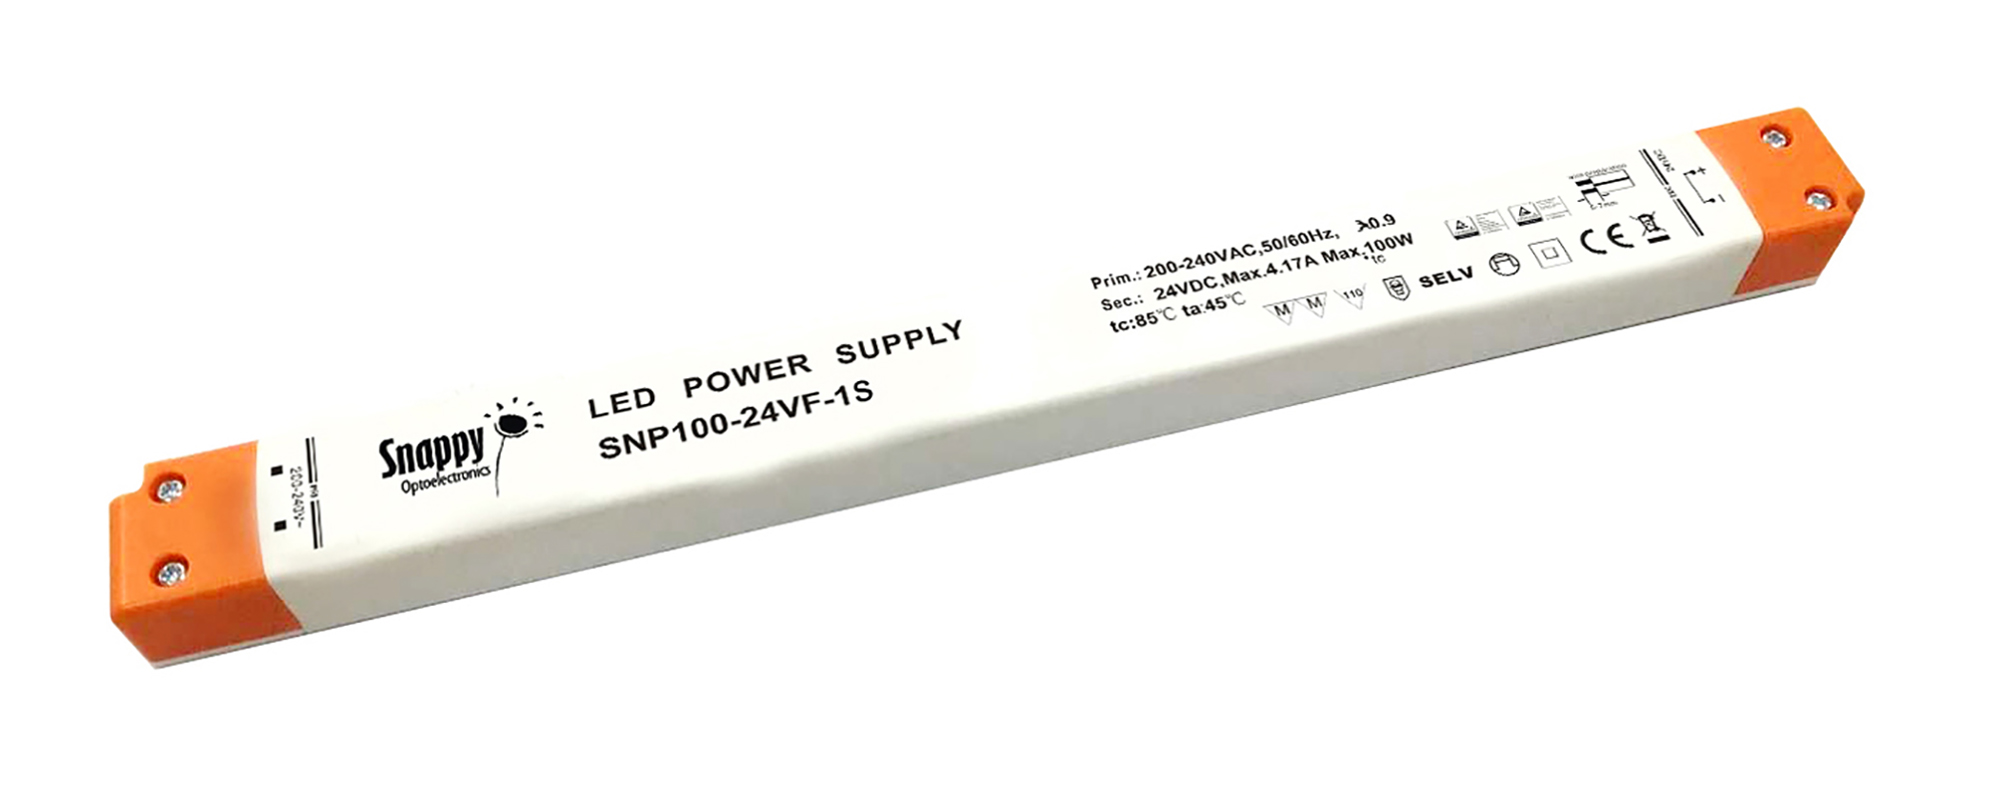 SNP100-24VF-1S  100W 321mm x 30mm x 18mm Constant Voltage Non-Dimmable LED Driver 24VDC 4.17A IP20.